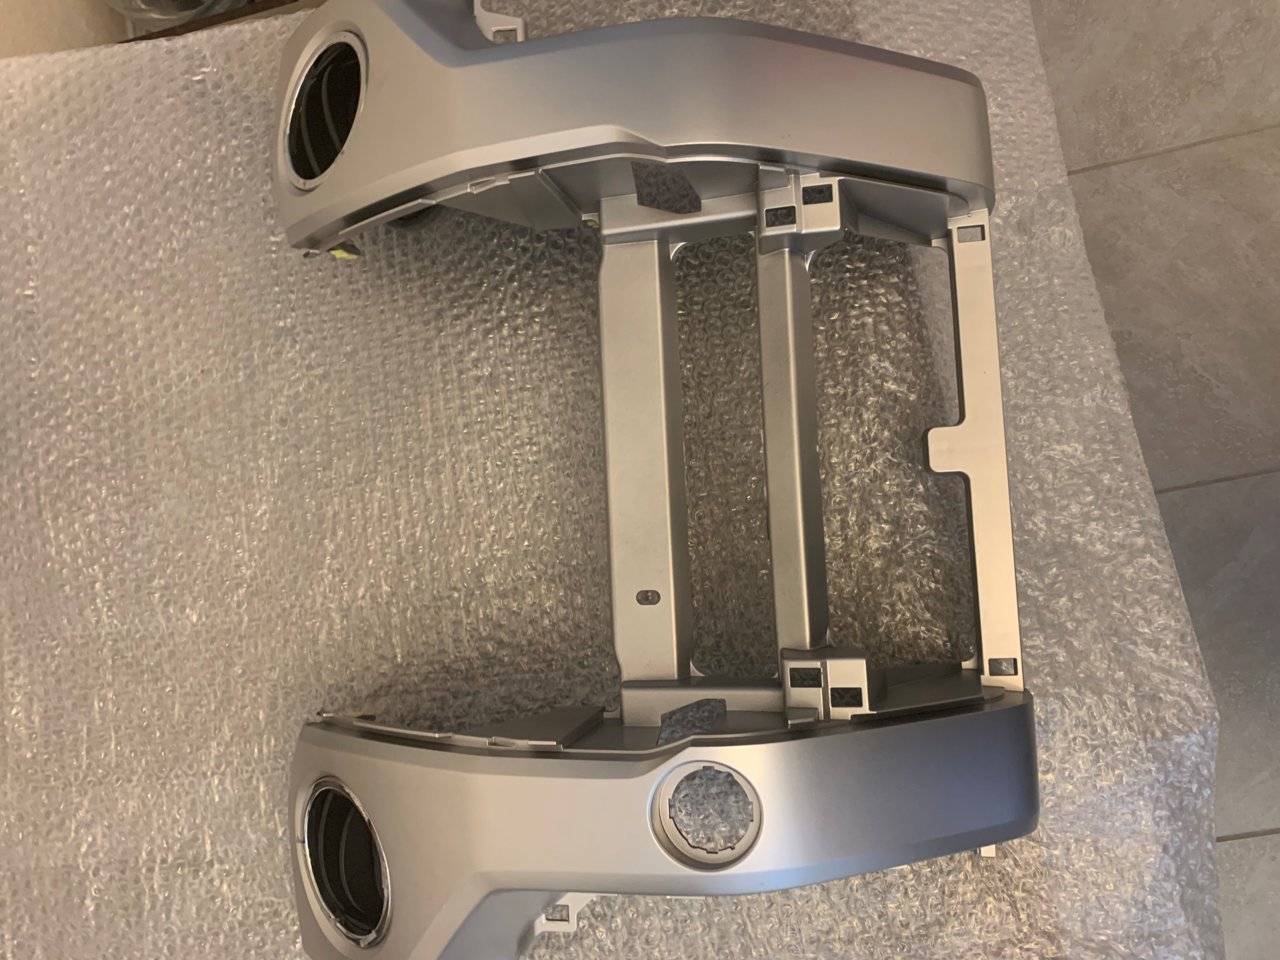 OEM Parts from 2020 TRD Sport - Center Console | Toyota Tundra Forum